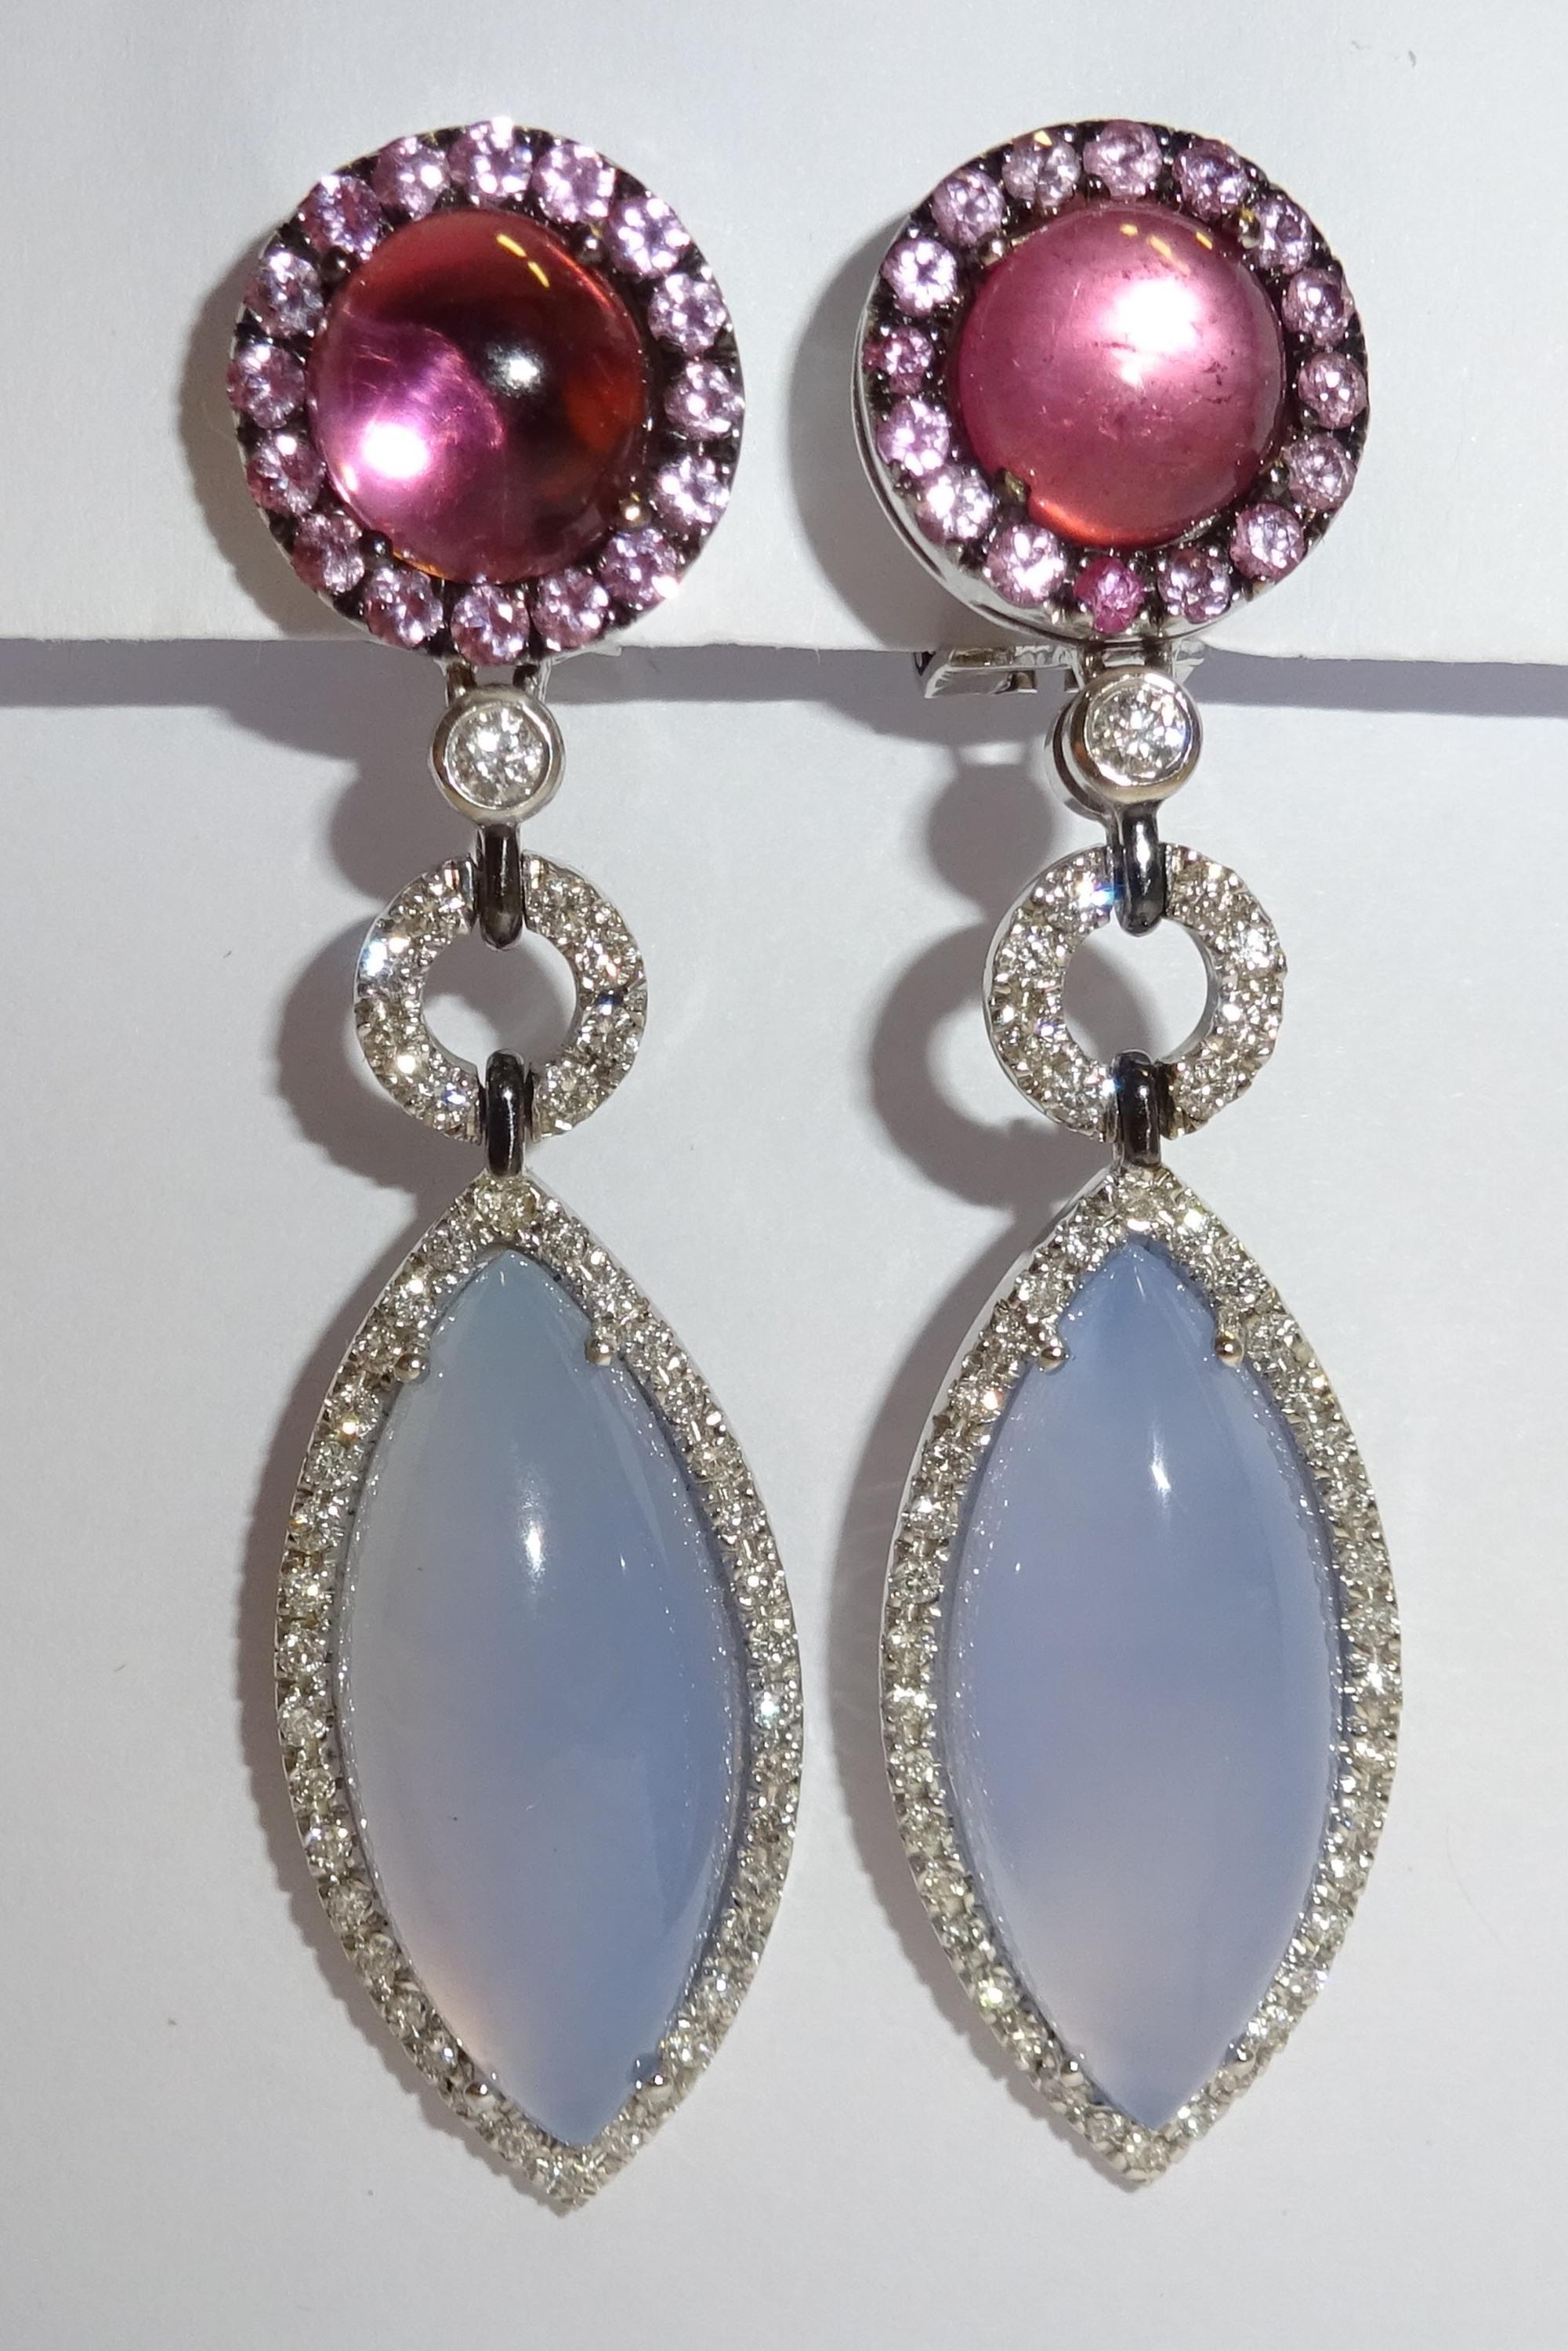 Cabochon White Gold Diamond, Tourmaline and Chalcedony Earrings